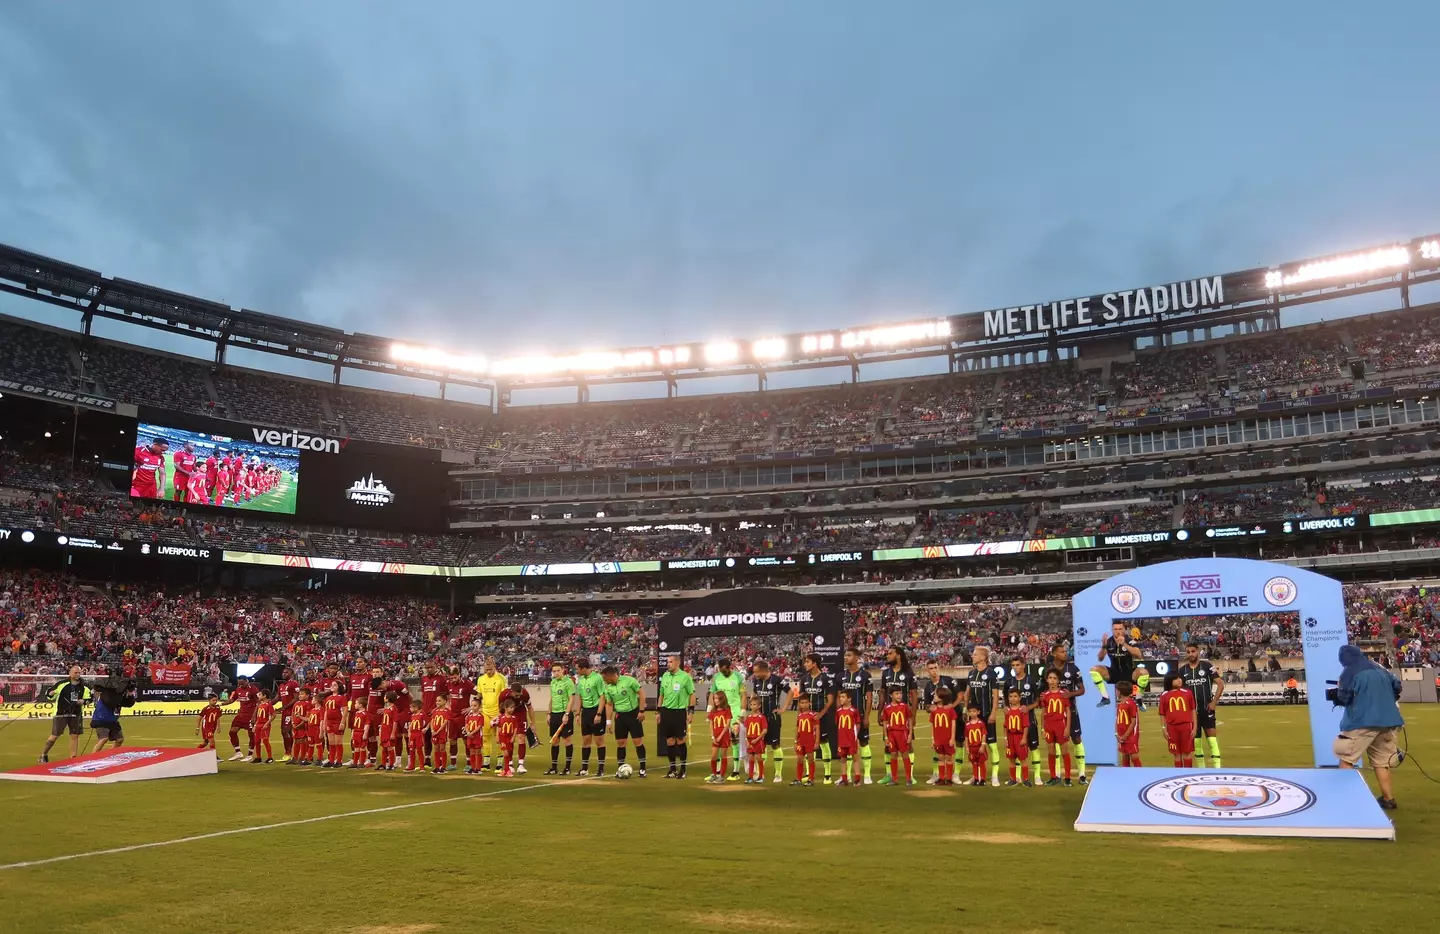 Manchester City vs. Liverpool at the MetLife Stadium back in 2018. Image: Getty